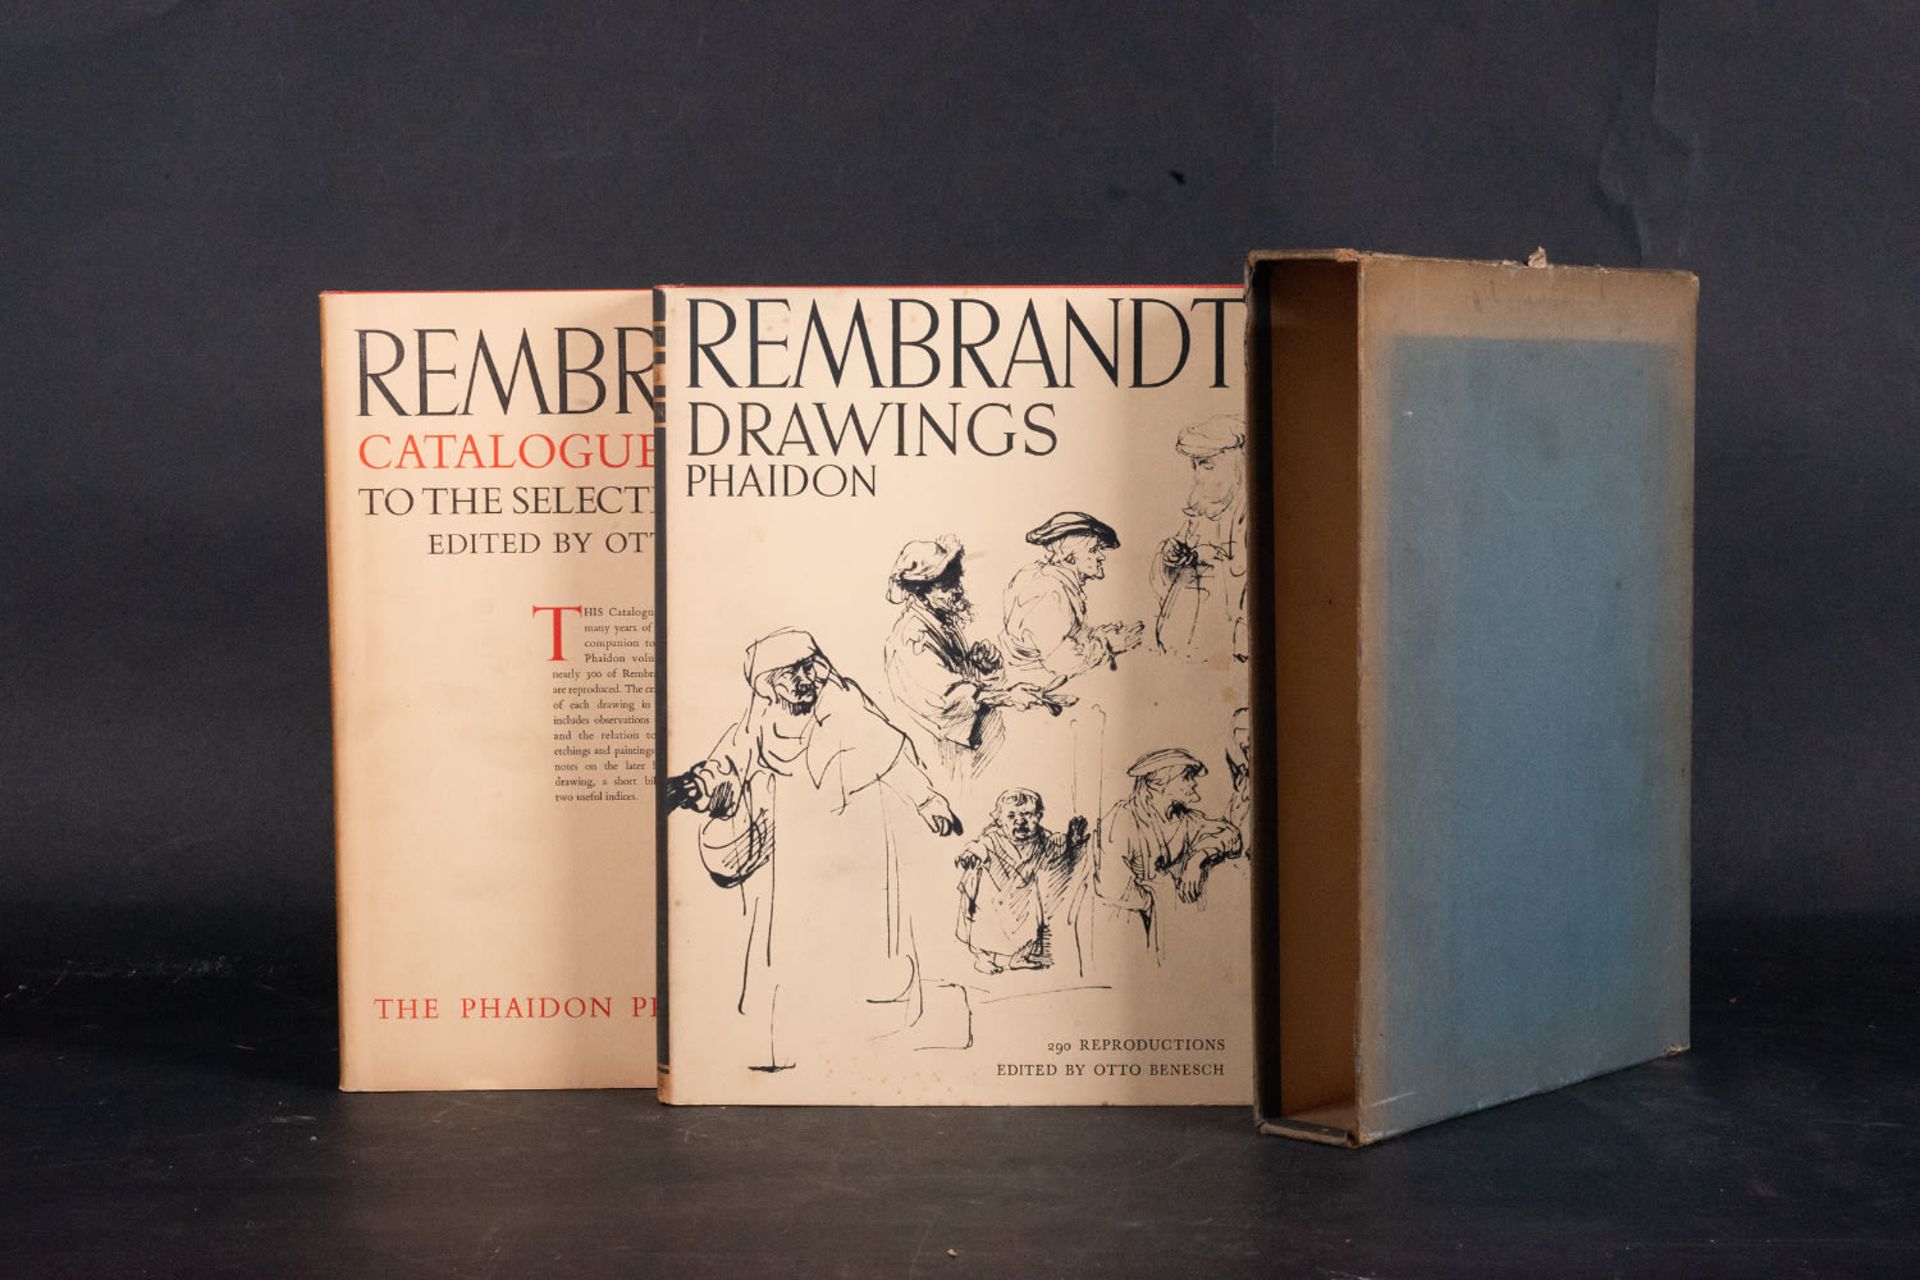 Rembrandt. Drawings & Catalog to the selected Drawings. otto benesch